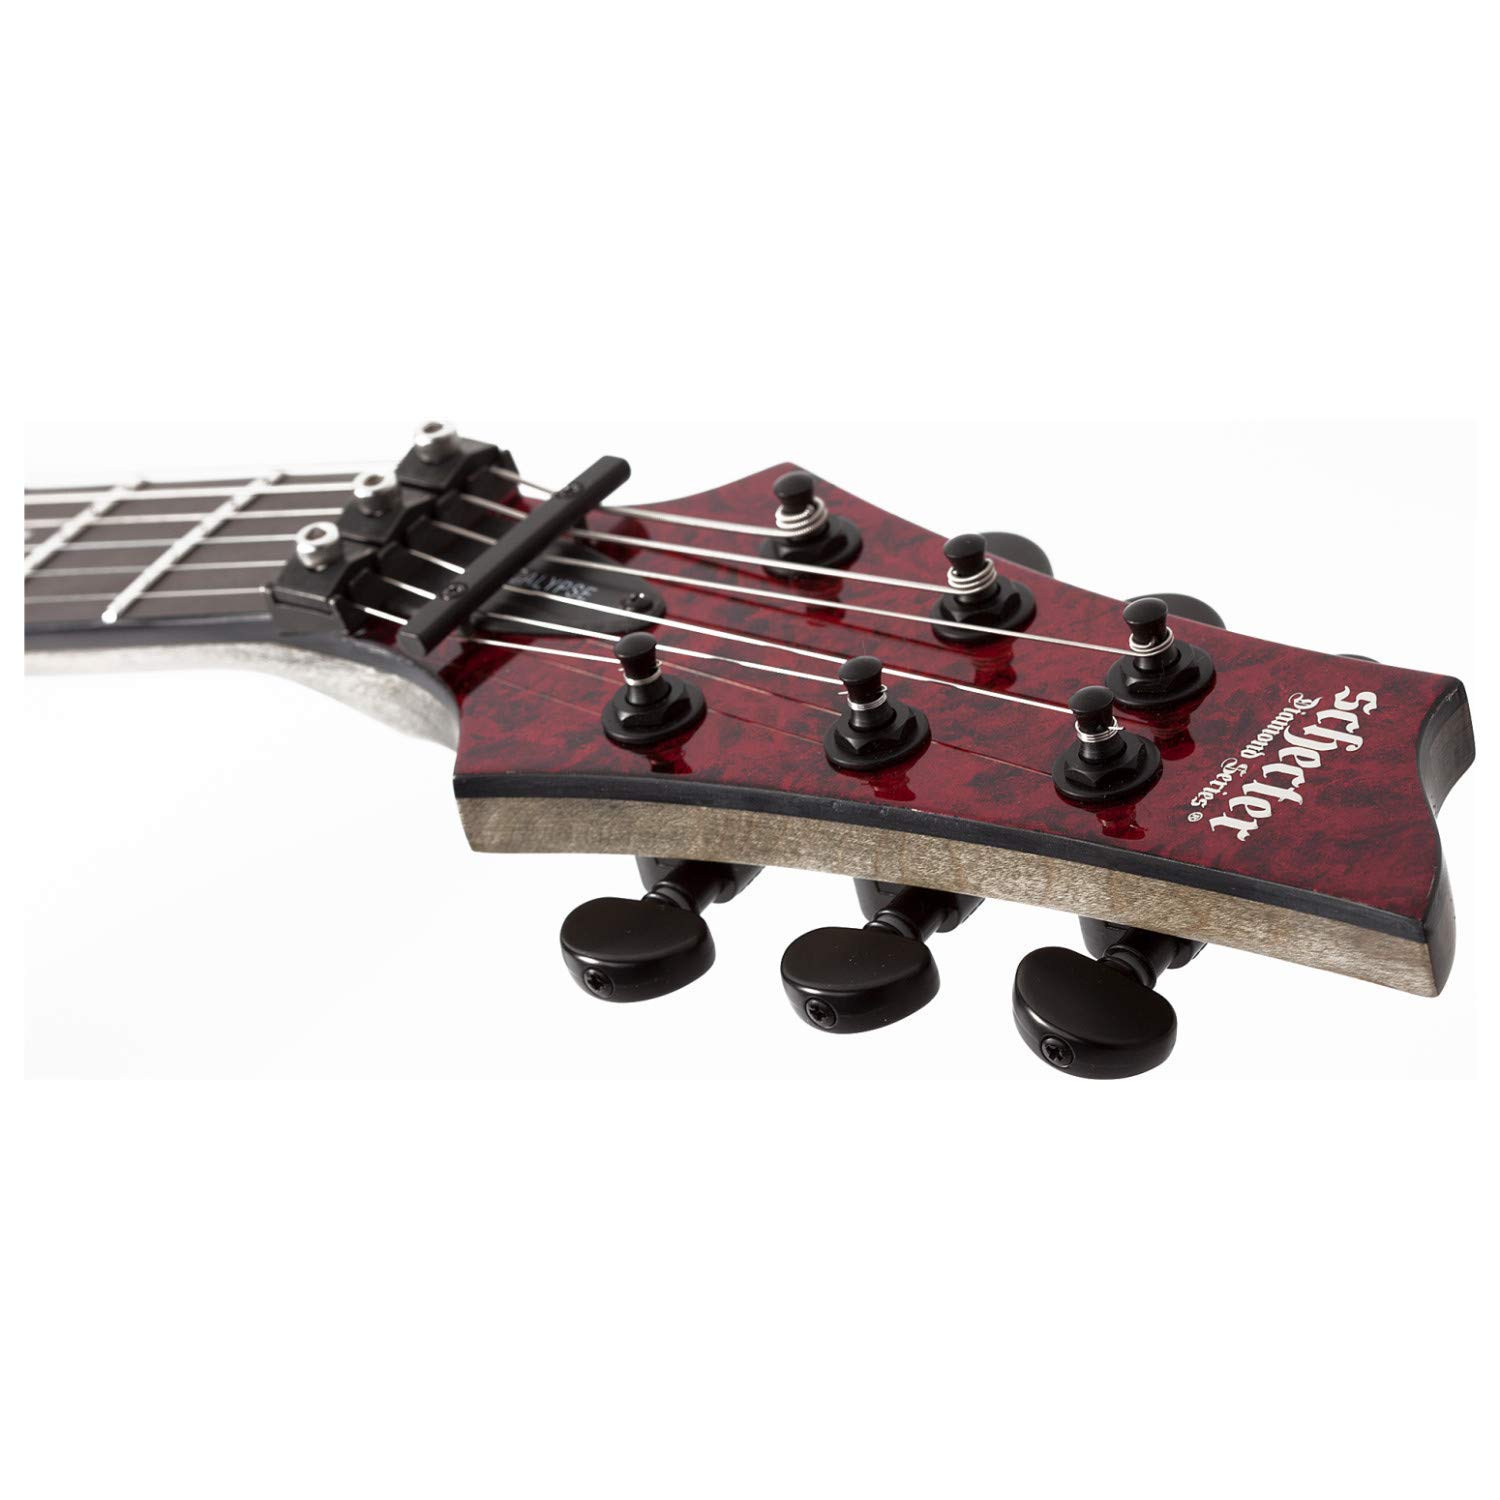 Schecter Apocalypse C-1 Fr S 2h Sustainiac - Red Reign - Double cut electric guitar - Variation 4